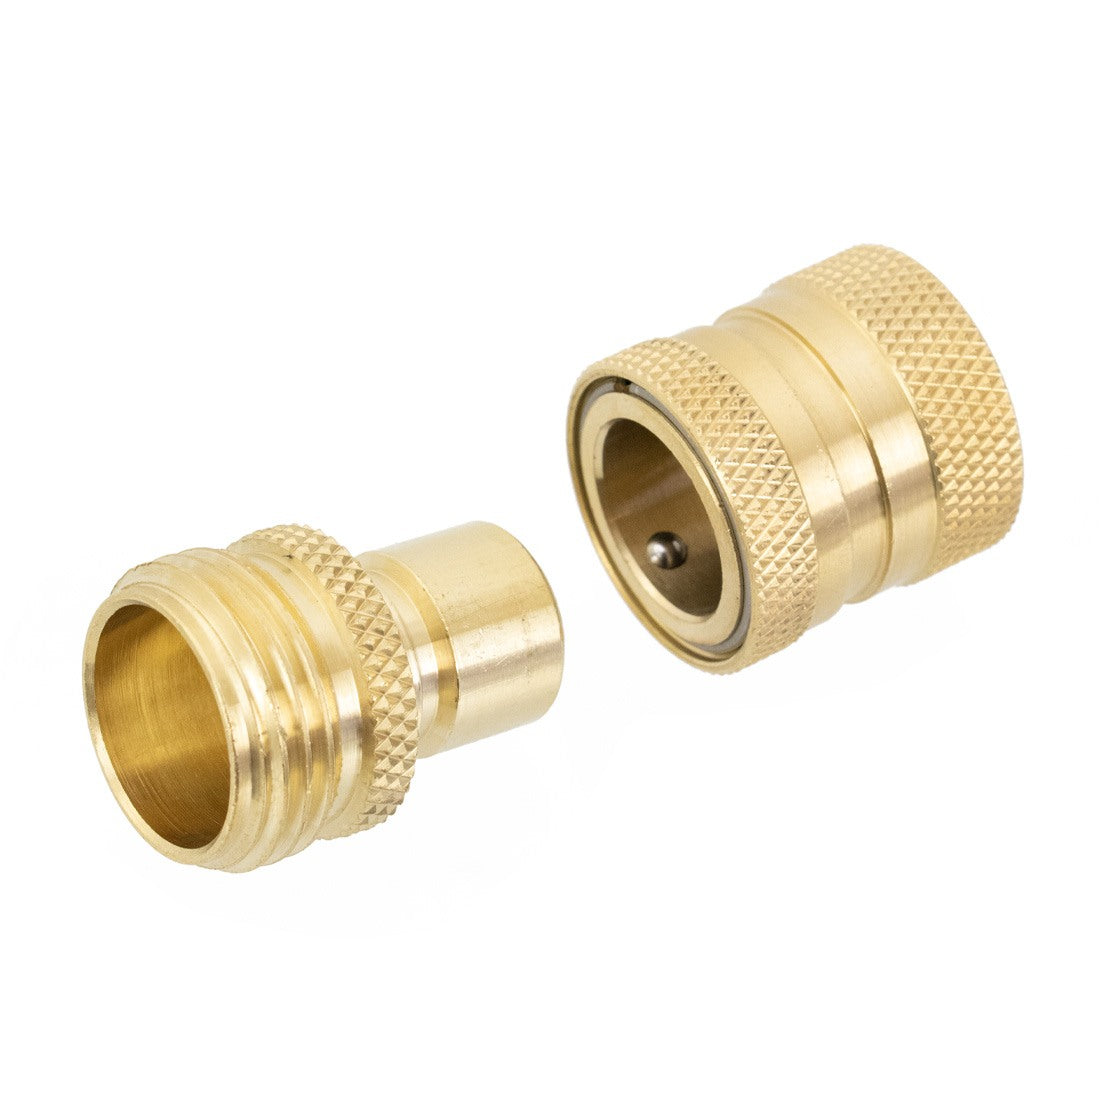 https://windowcleaner.com/cdn/shop/products/0008_garden-hose-quick-connect-male-and-female-set-brass.jpg?v=1667969596&width=1946